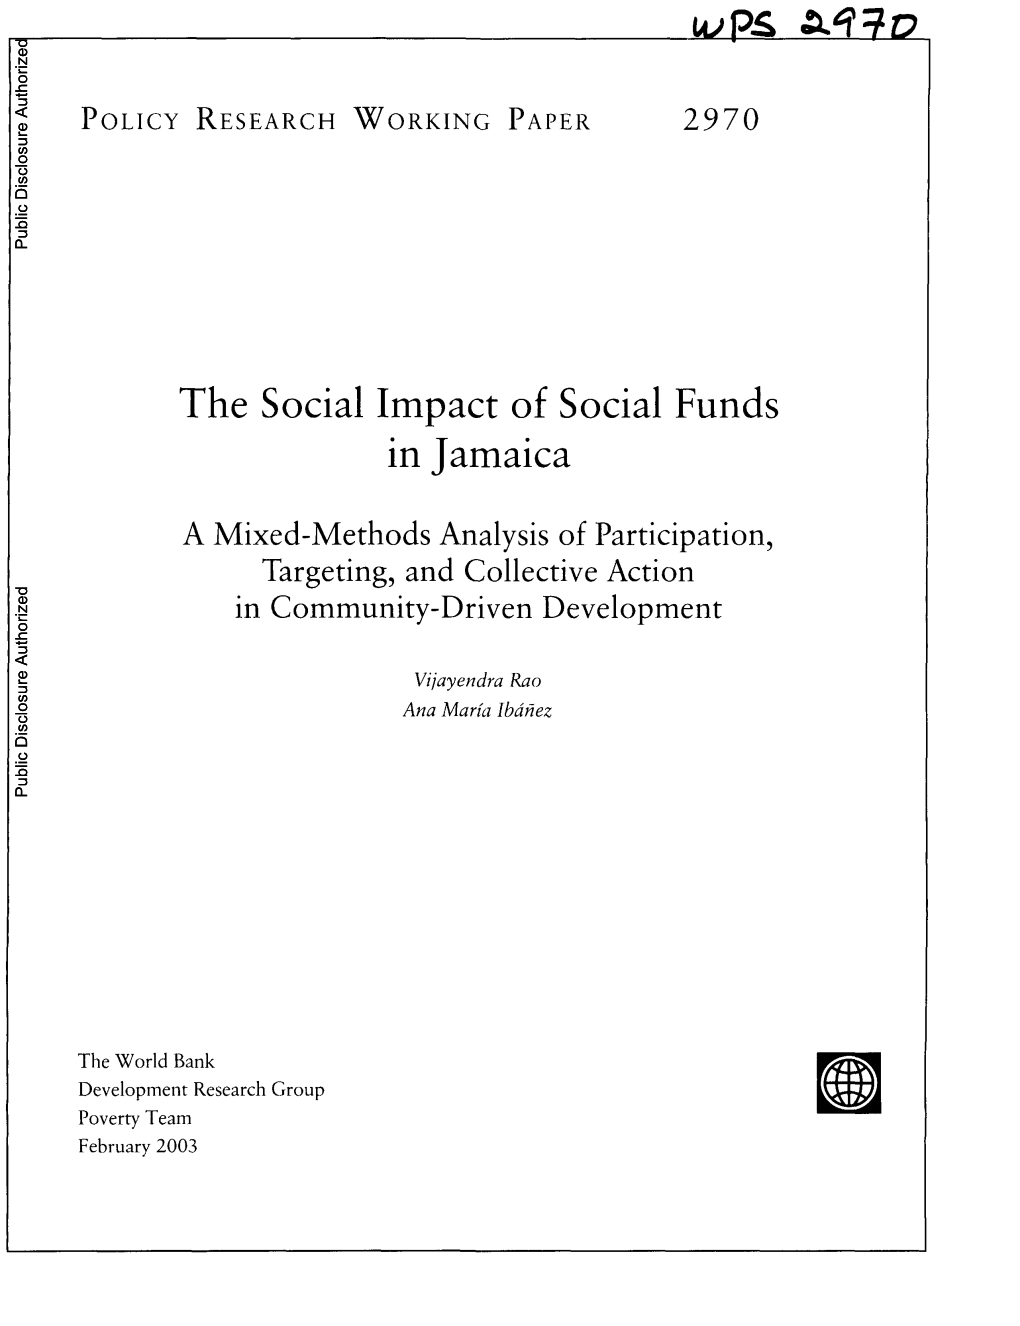 The Social Impact of Social Funds in Jamaica